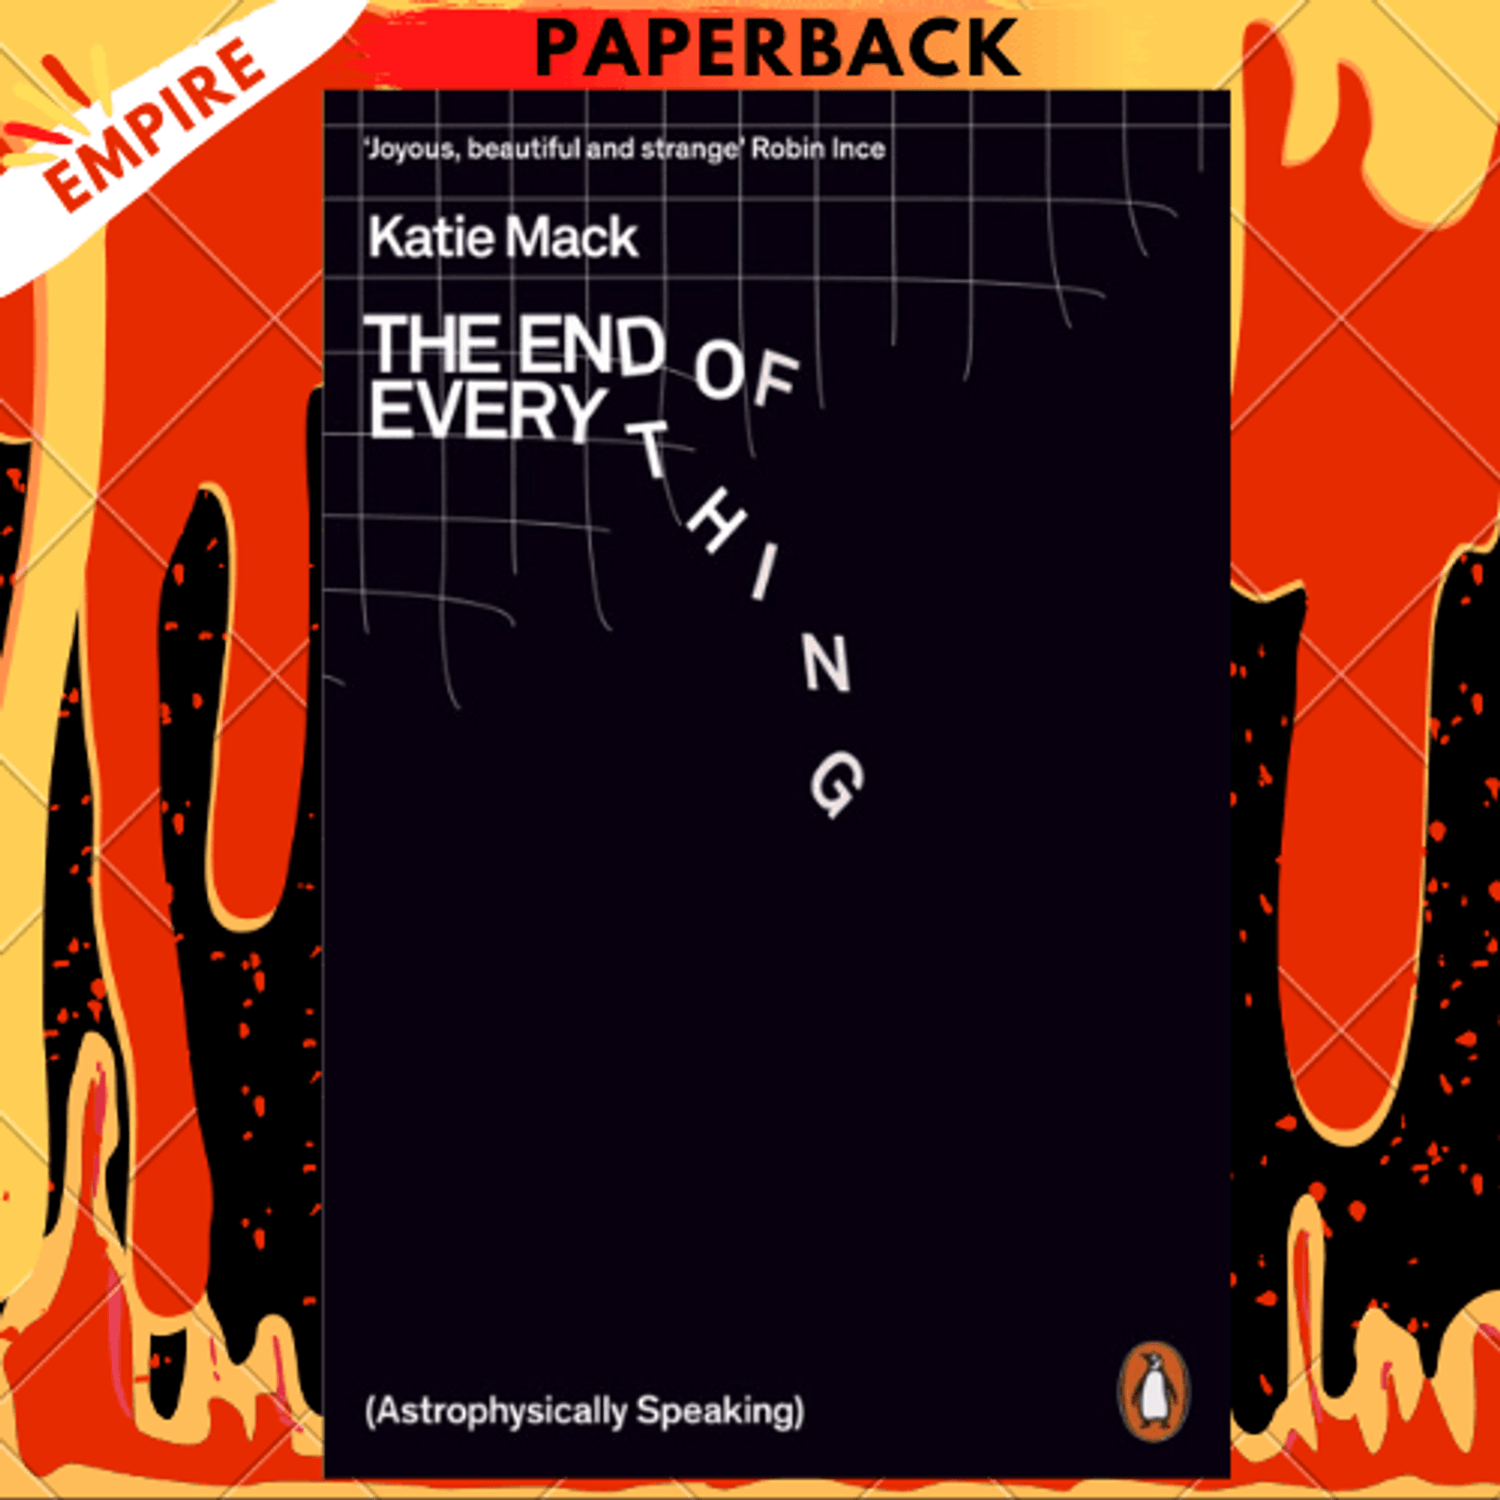 The End of Everything: (Astrophysically by Mack, Katie